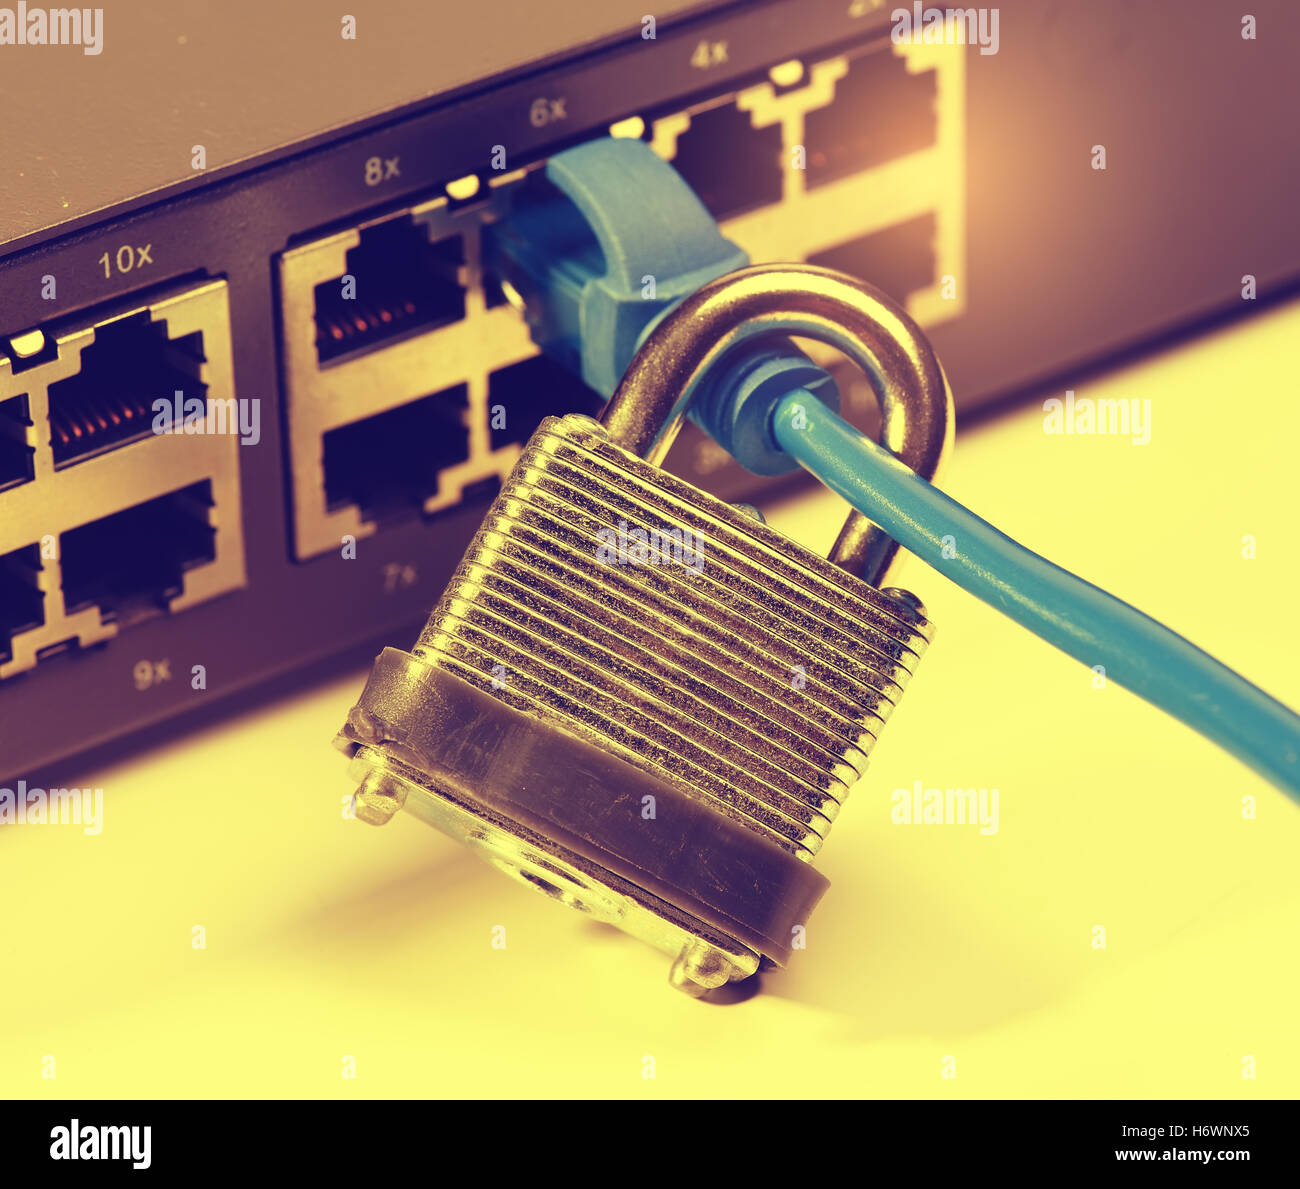 network and data protection concept with padlock and switch Stock Photo